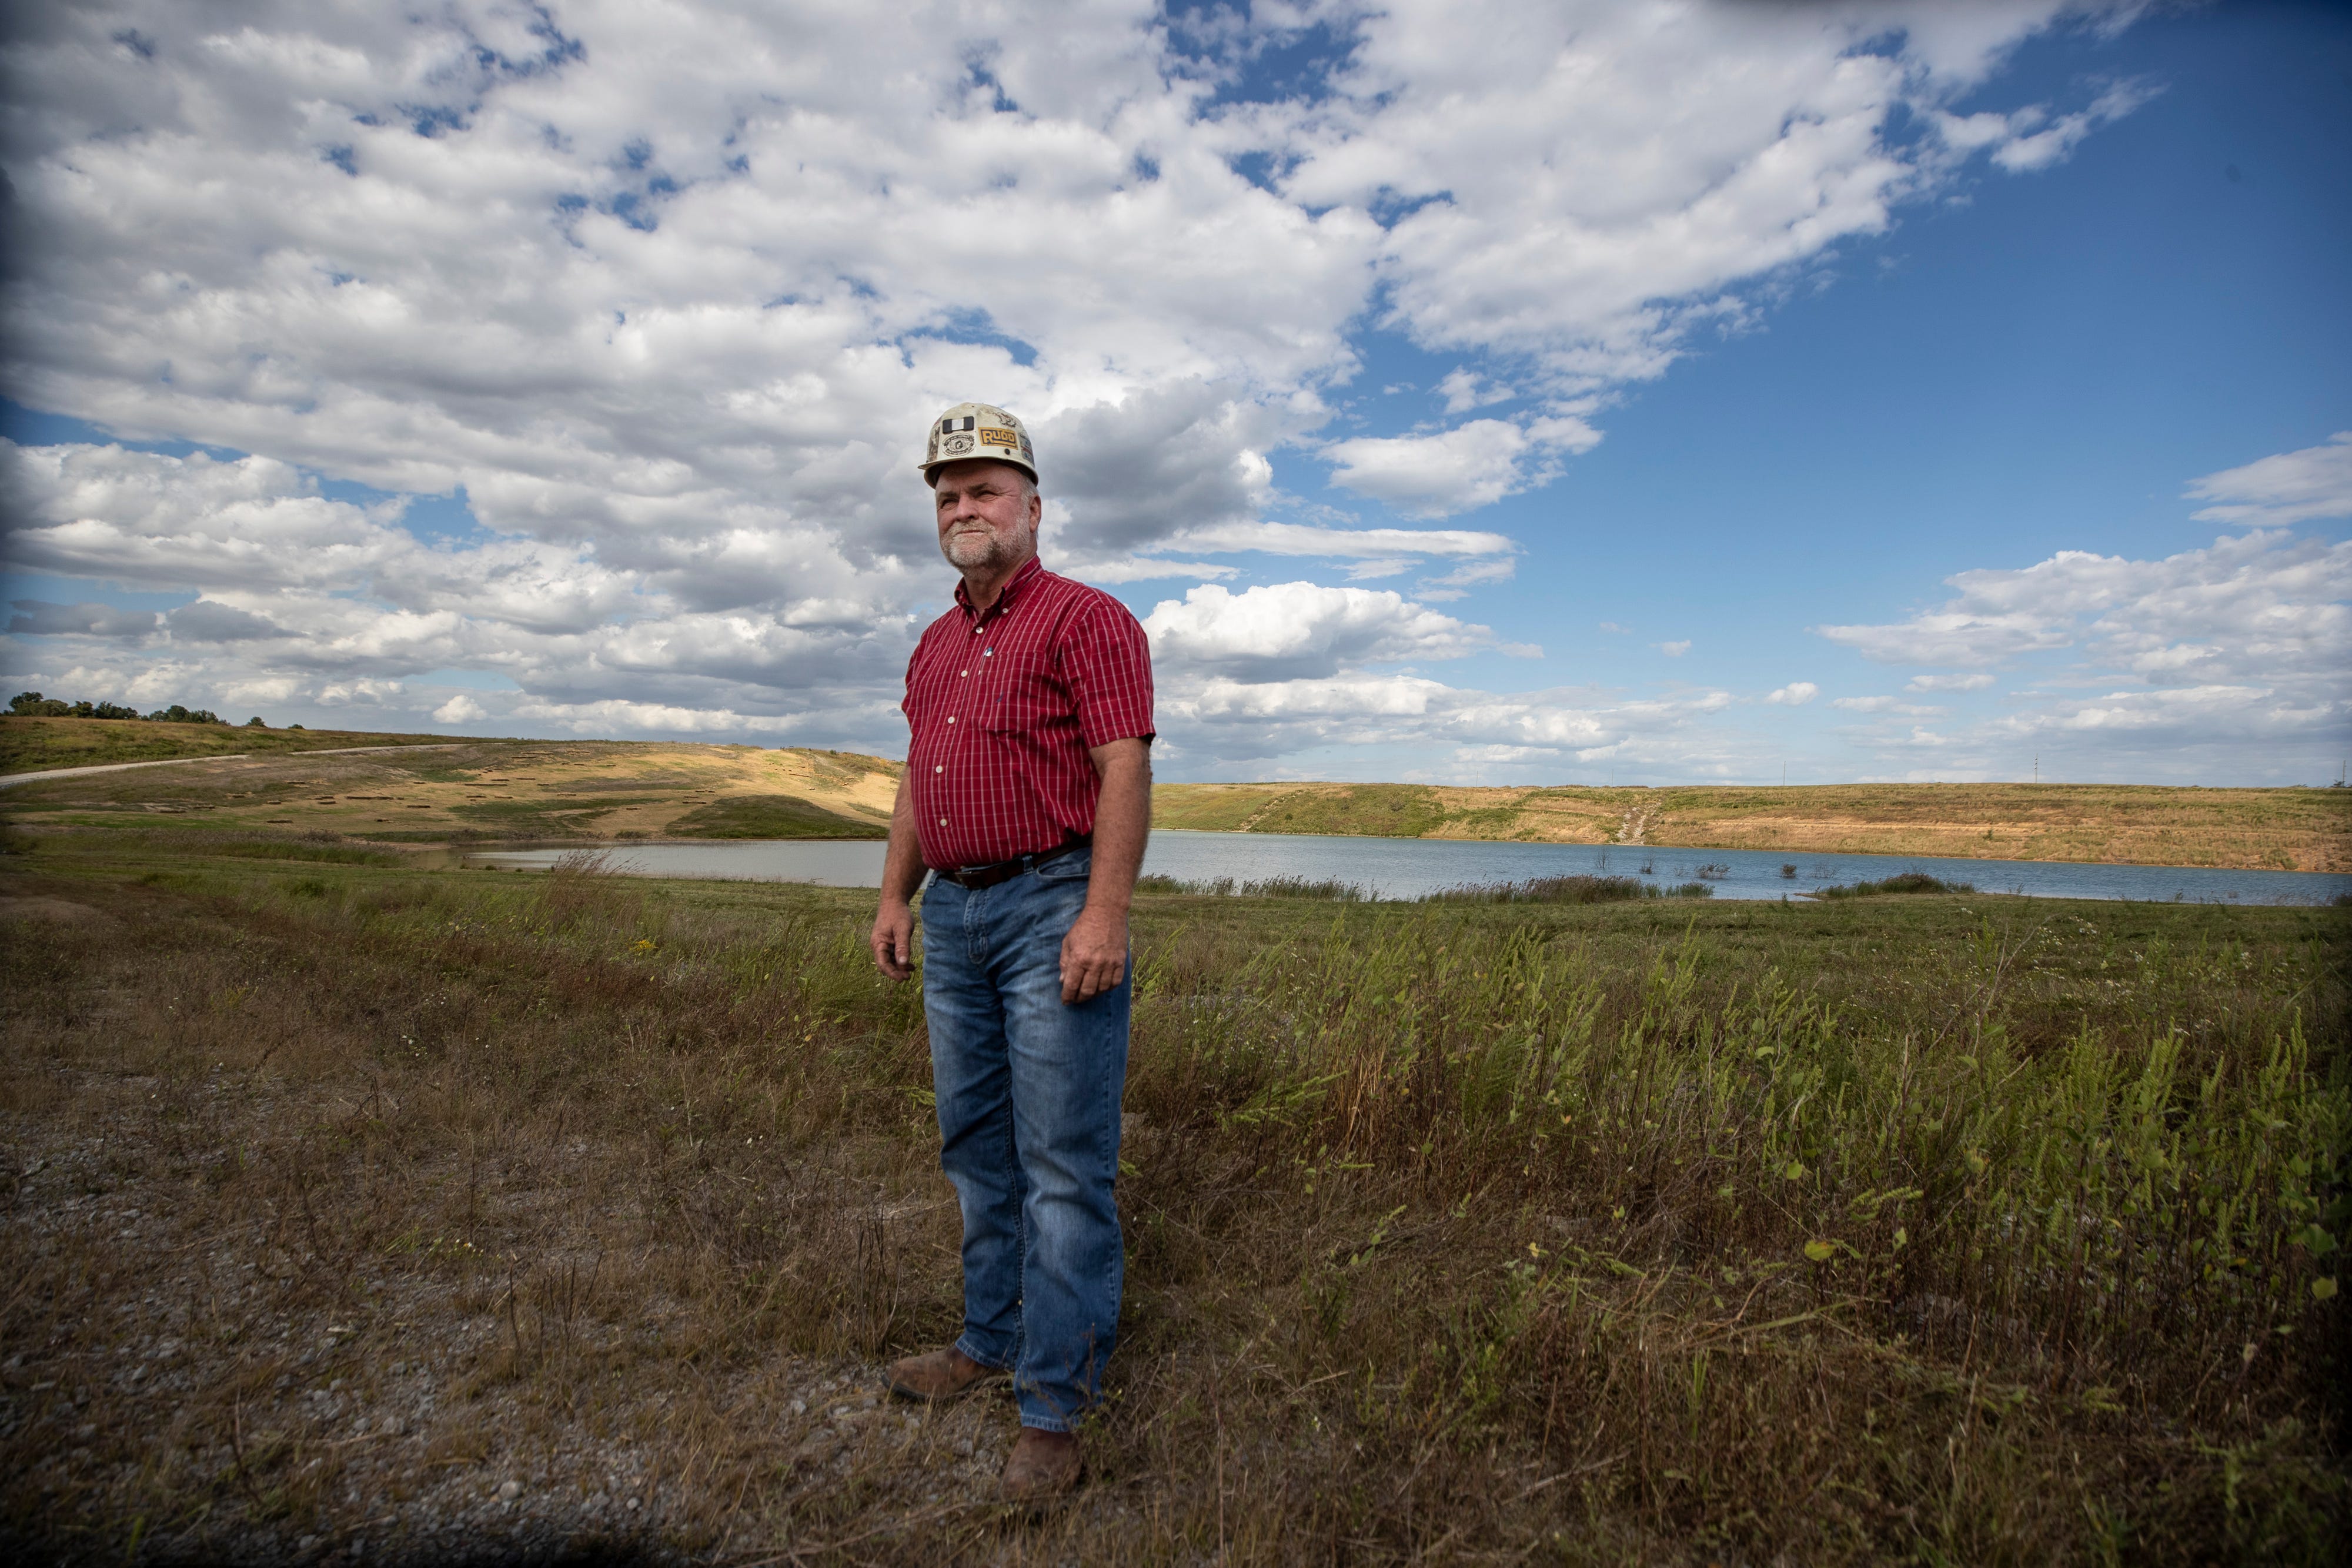 Jon Rogers of the Rogers Brothers Coal Co. stands on the site of a reclaimed strip mine in Muhlenberg County, Kentucky. The land is ready for for commercial development. Oct. 1, 2020